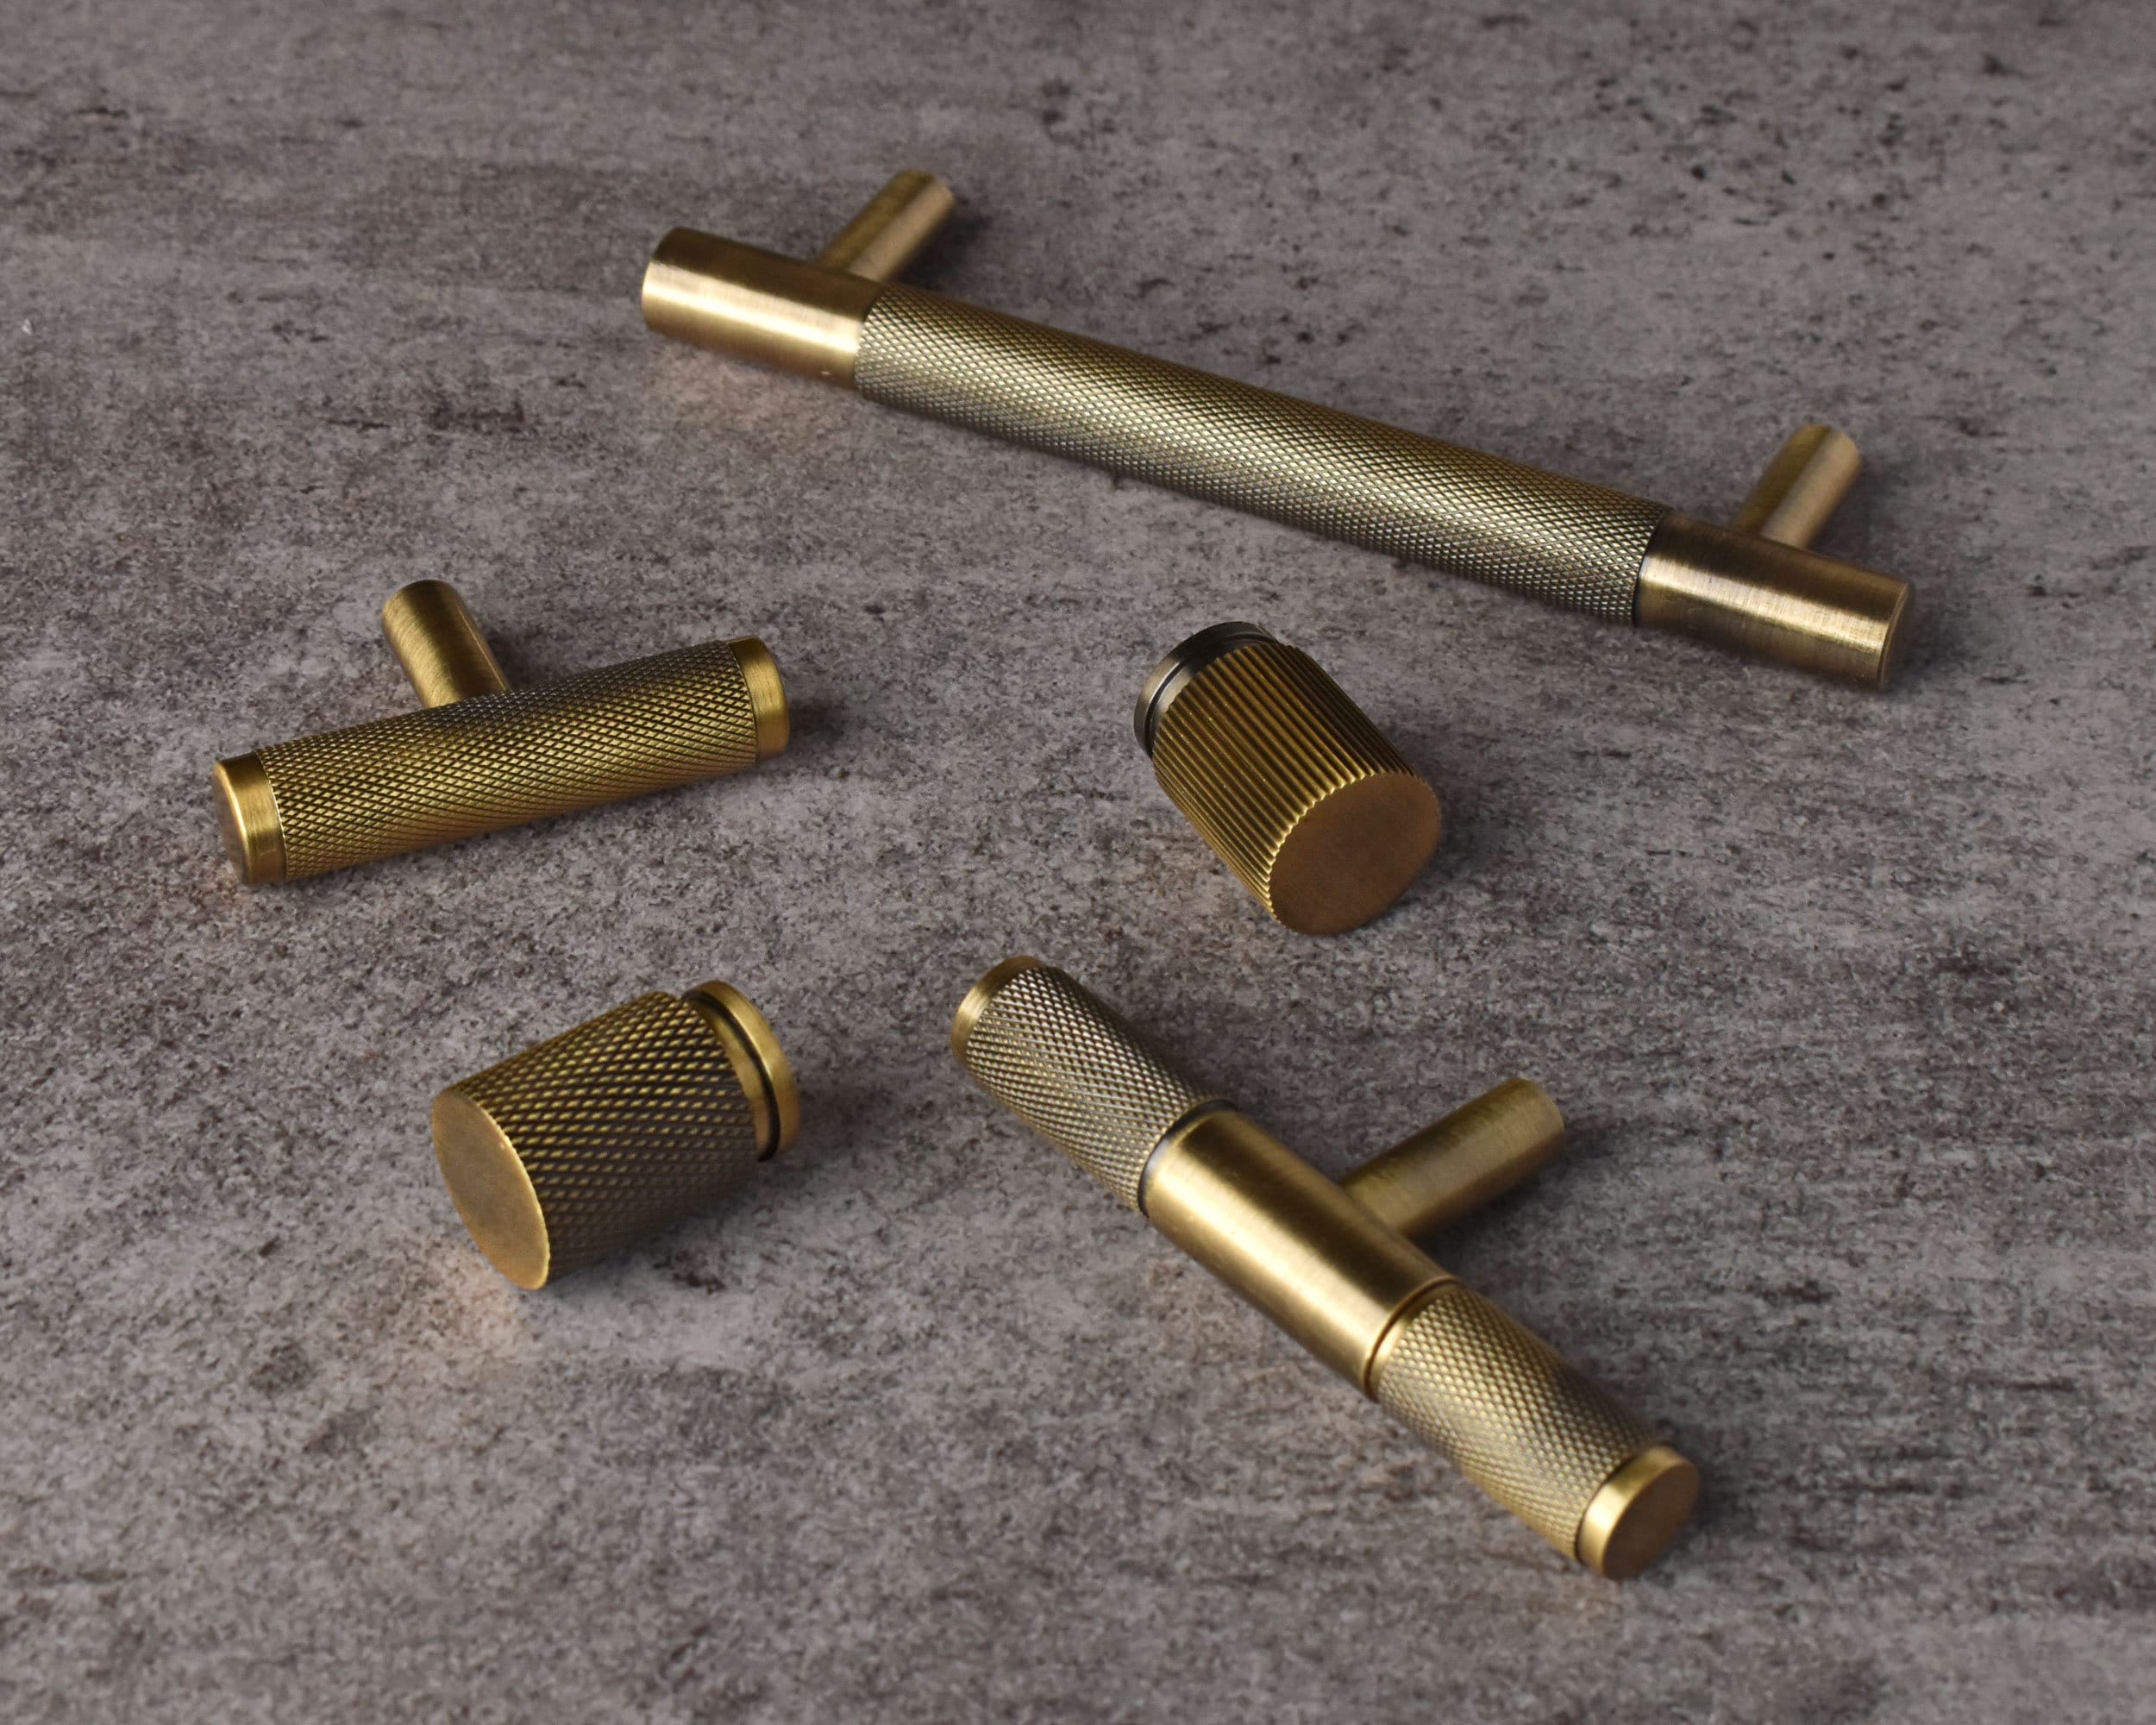 Antique Brass Knurled Kitchen Handles and Knobs,Bronze Door Handles,Brass  Knurled Door Wardrobe Cabinet Handles, Knurling Handles